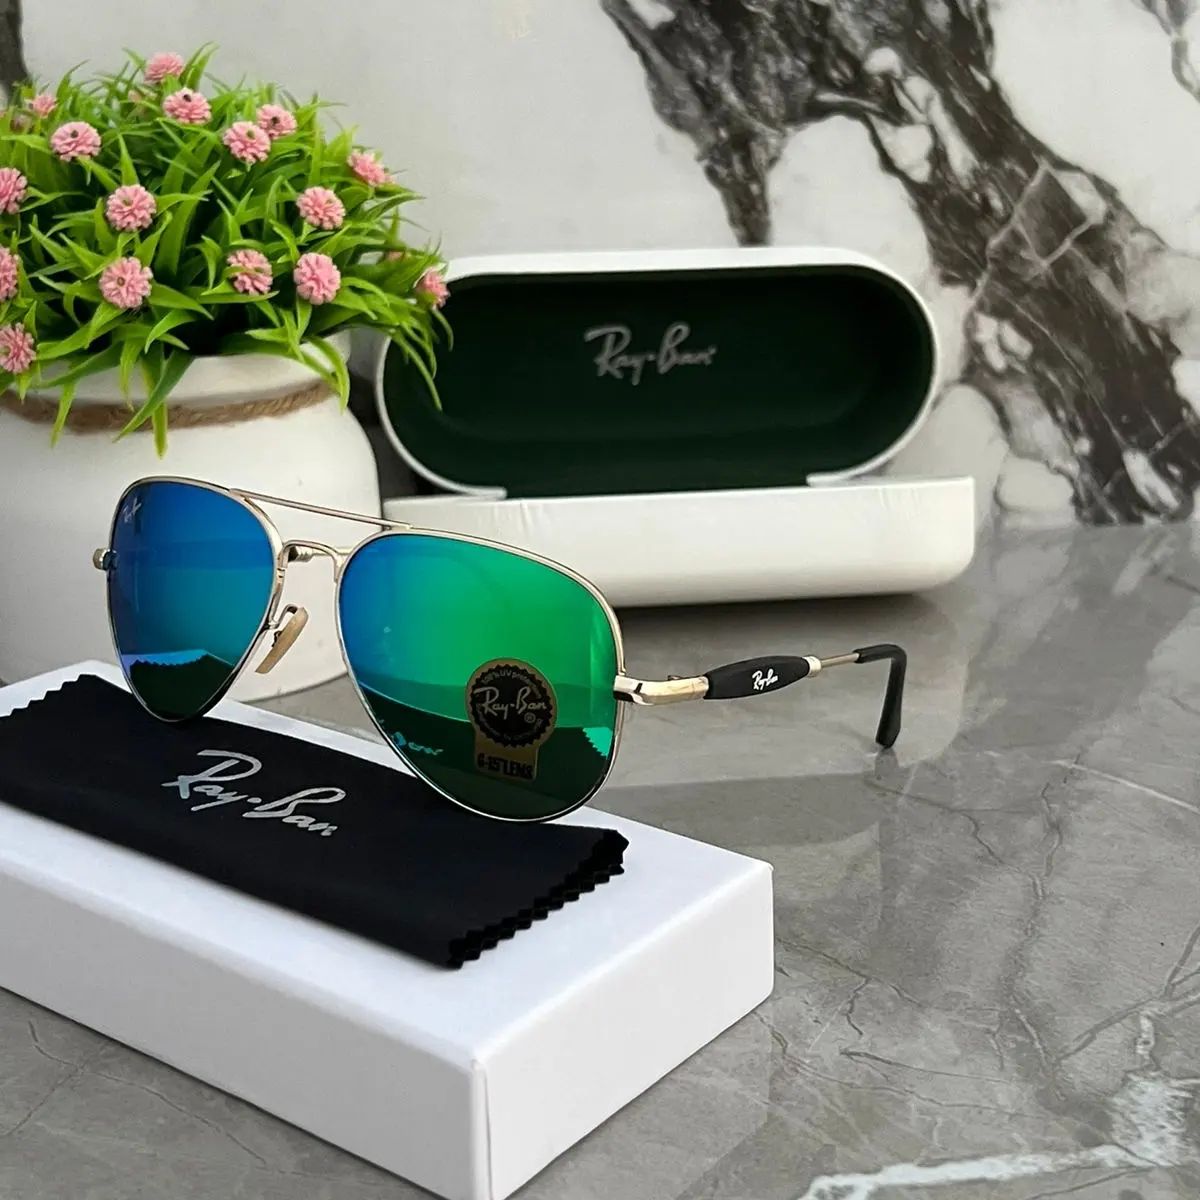 New Fancy Men's double Shaded Aviator Metal Trendy Hot Favourite Wintage Sunglass For Unisex.